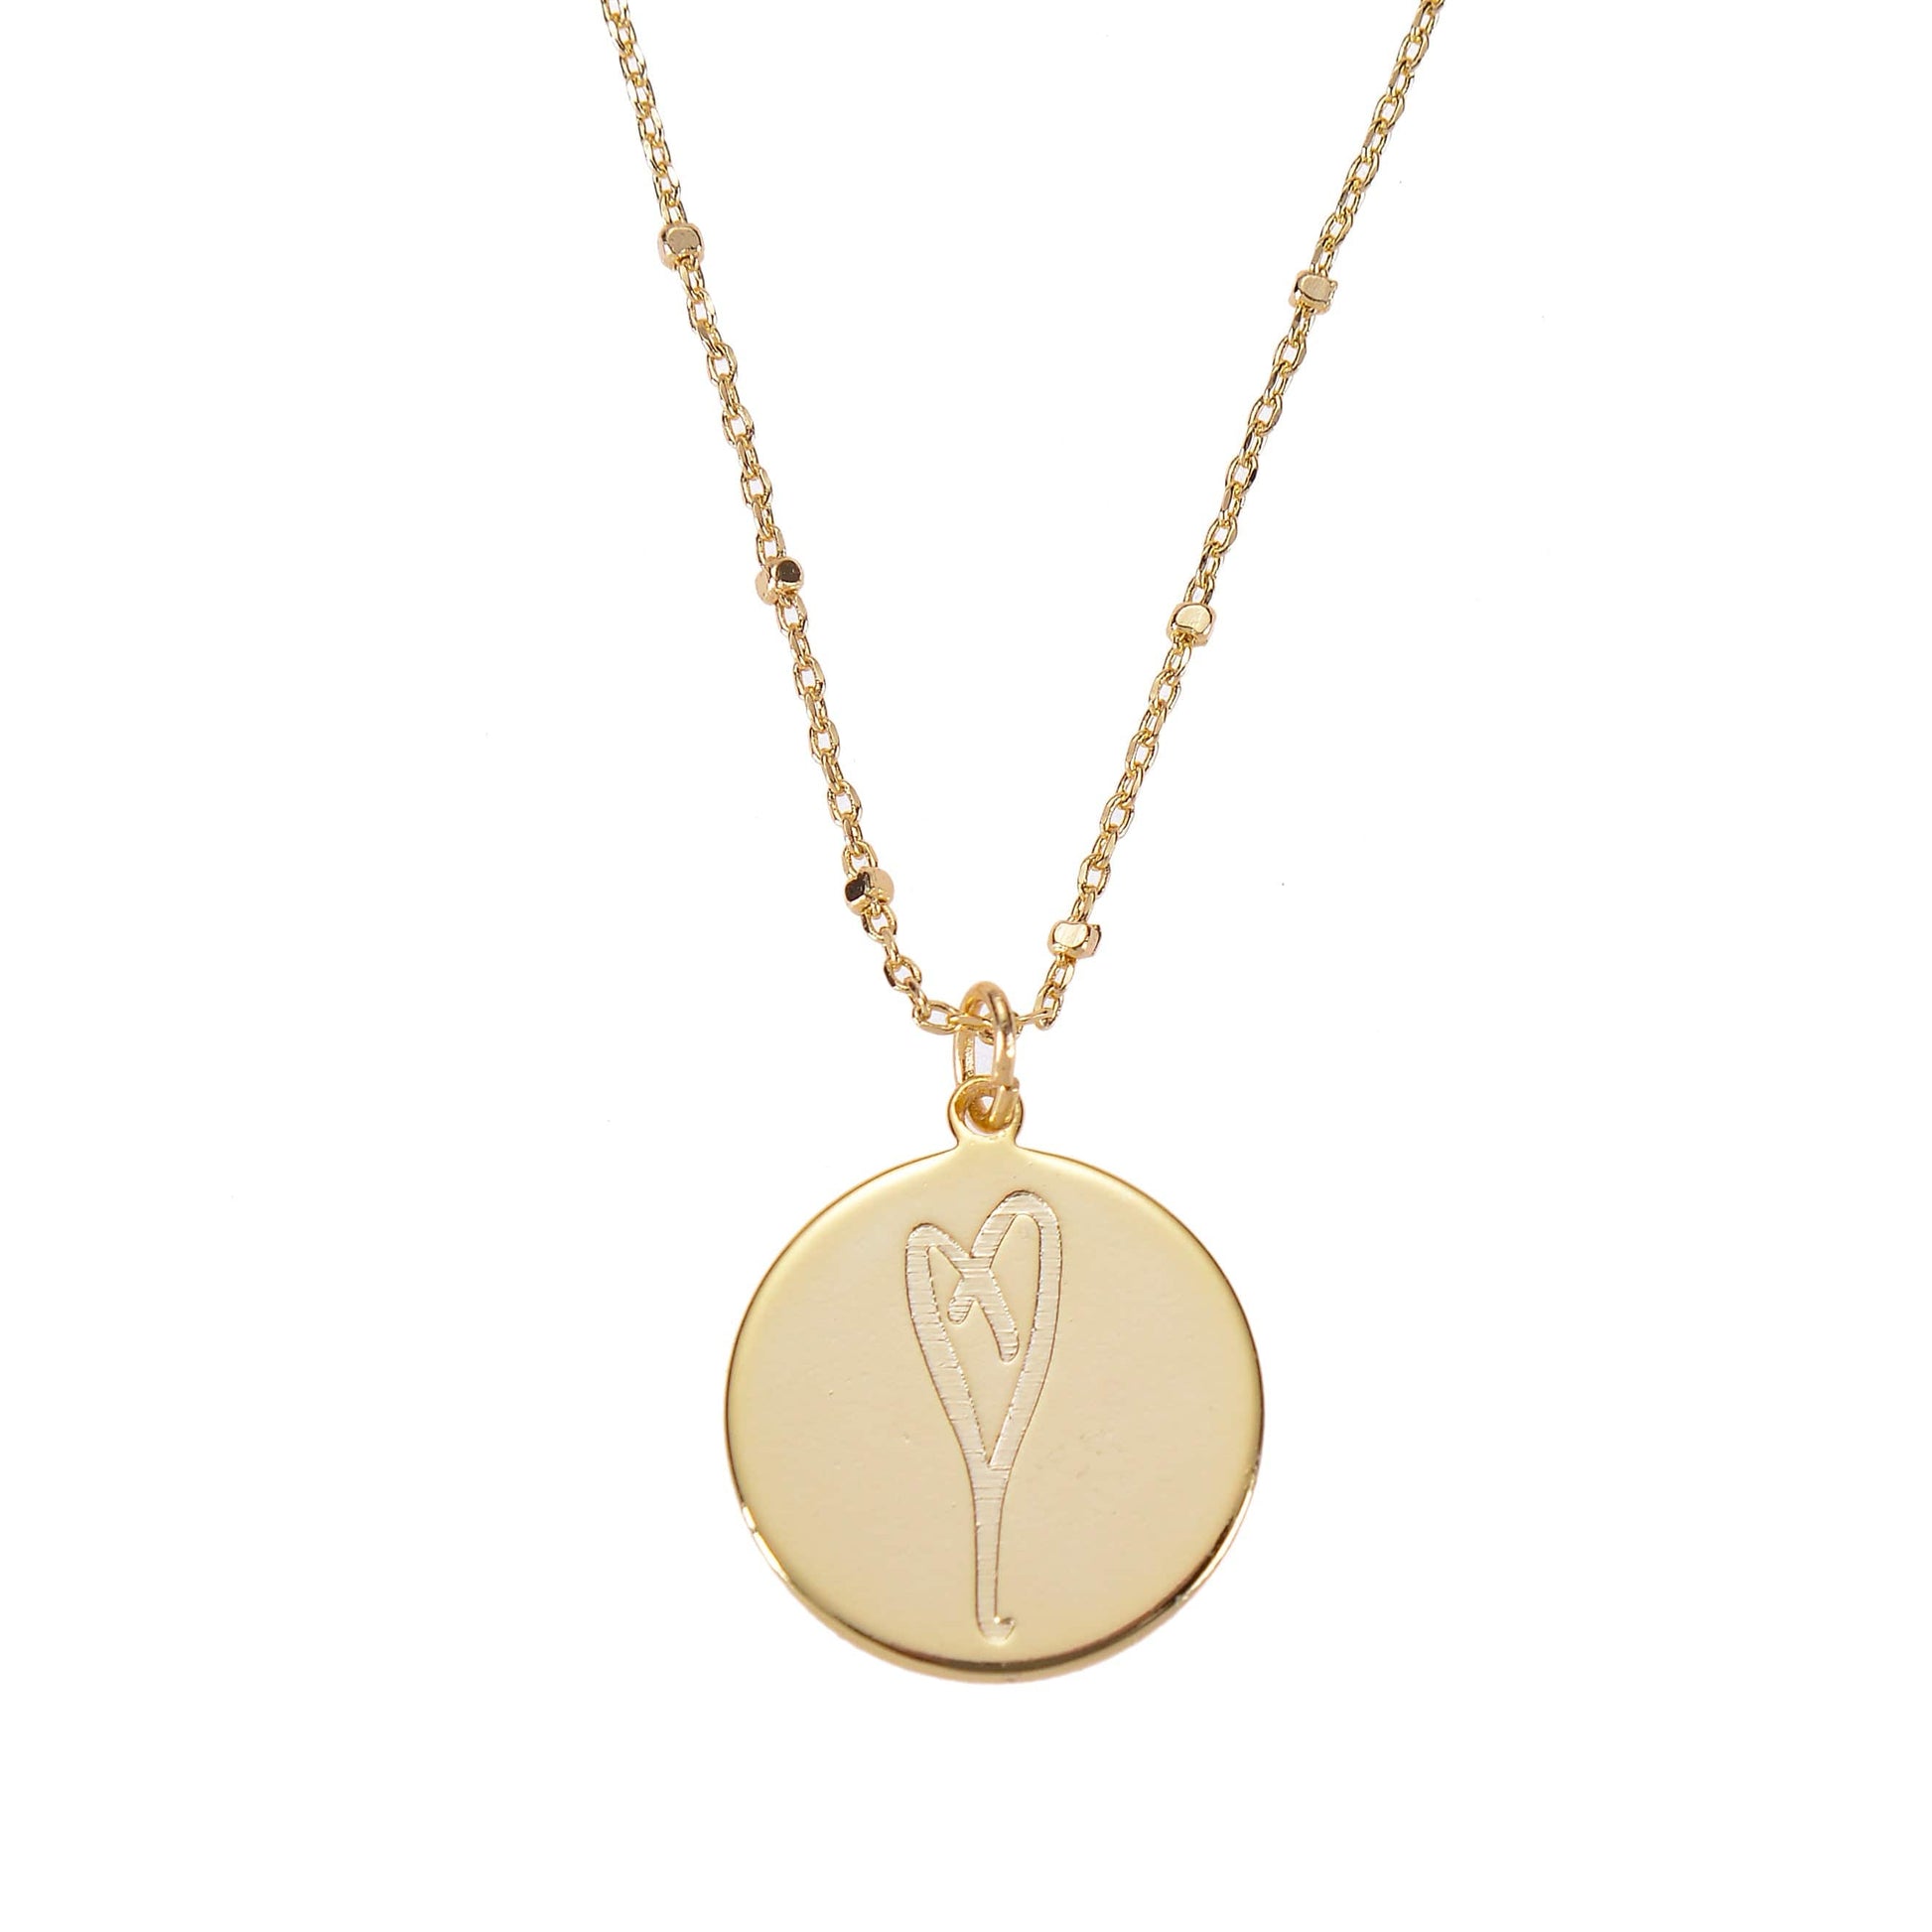 Engraved heart on a gold disc with a beaded chain necklace 